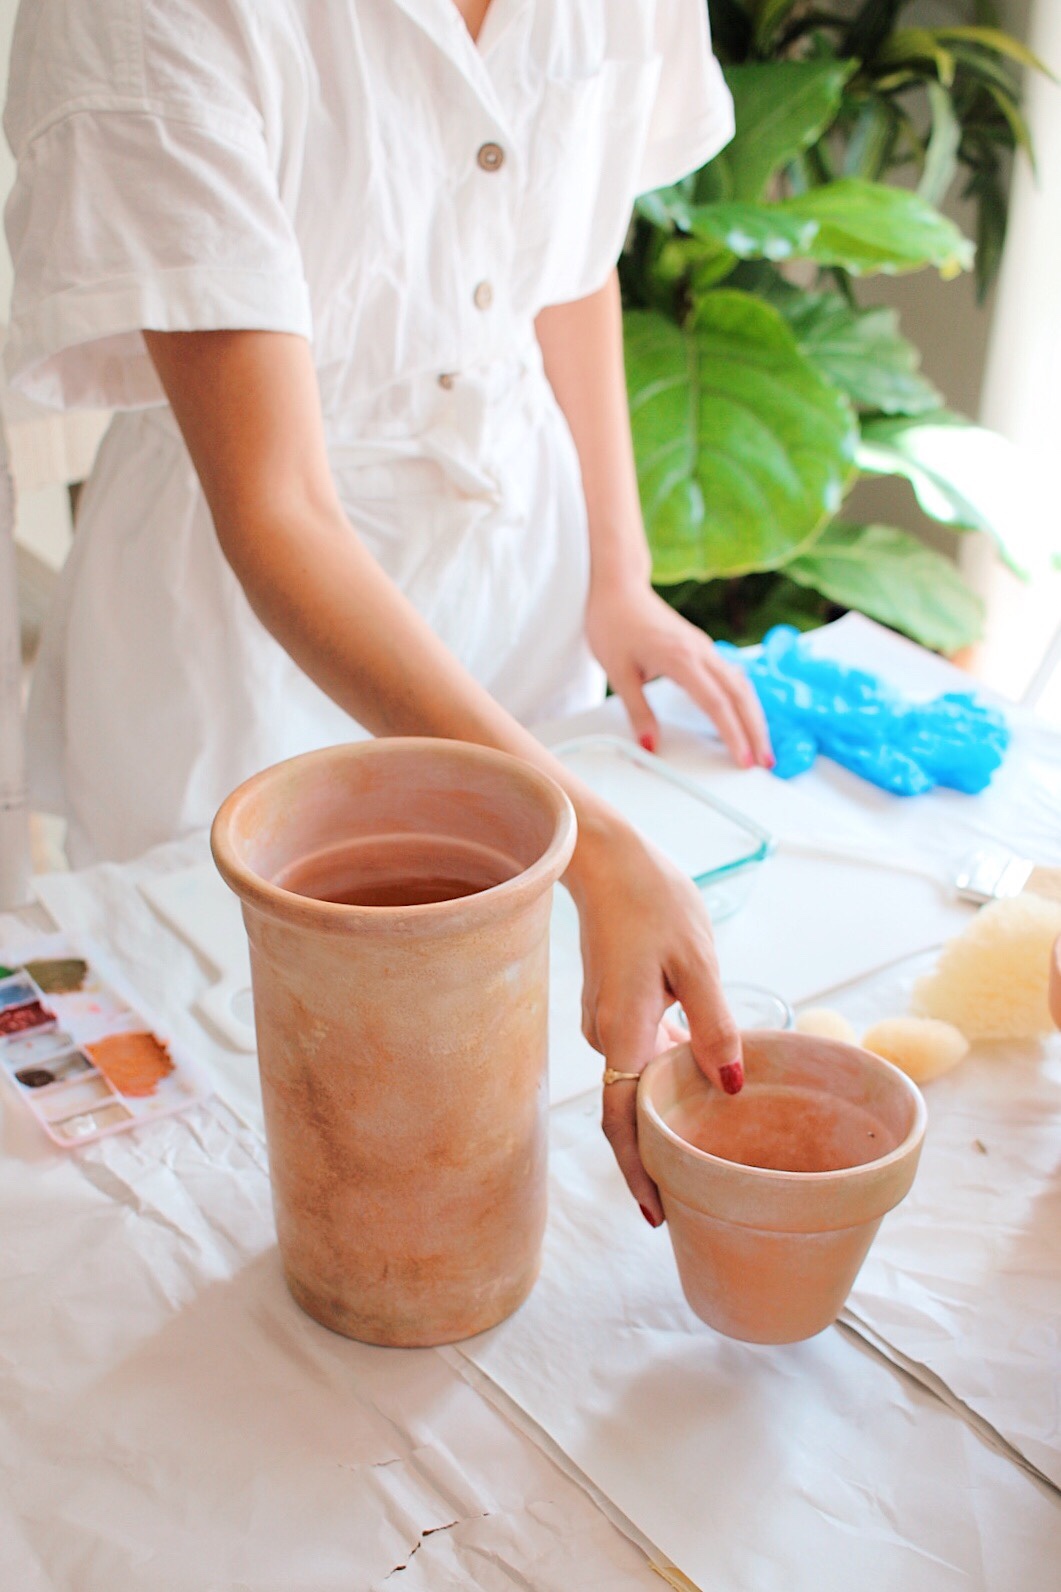 Best Paint for Terracotta Clay Pots! - The Graphics Fairy